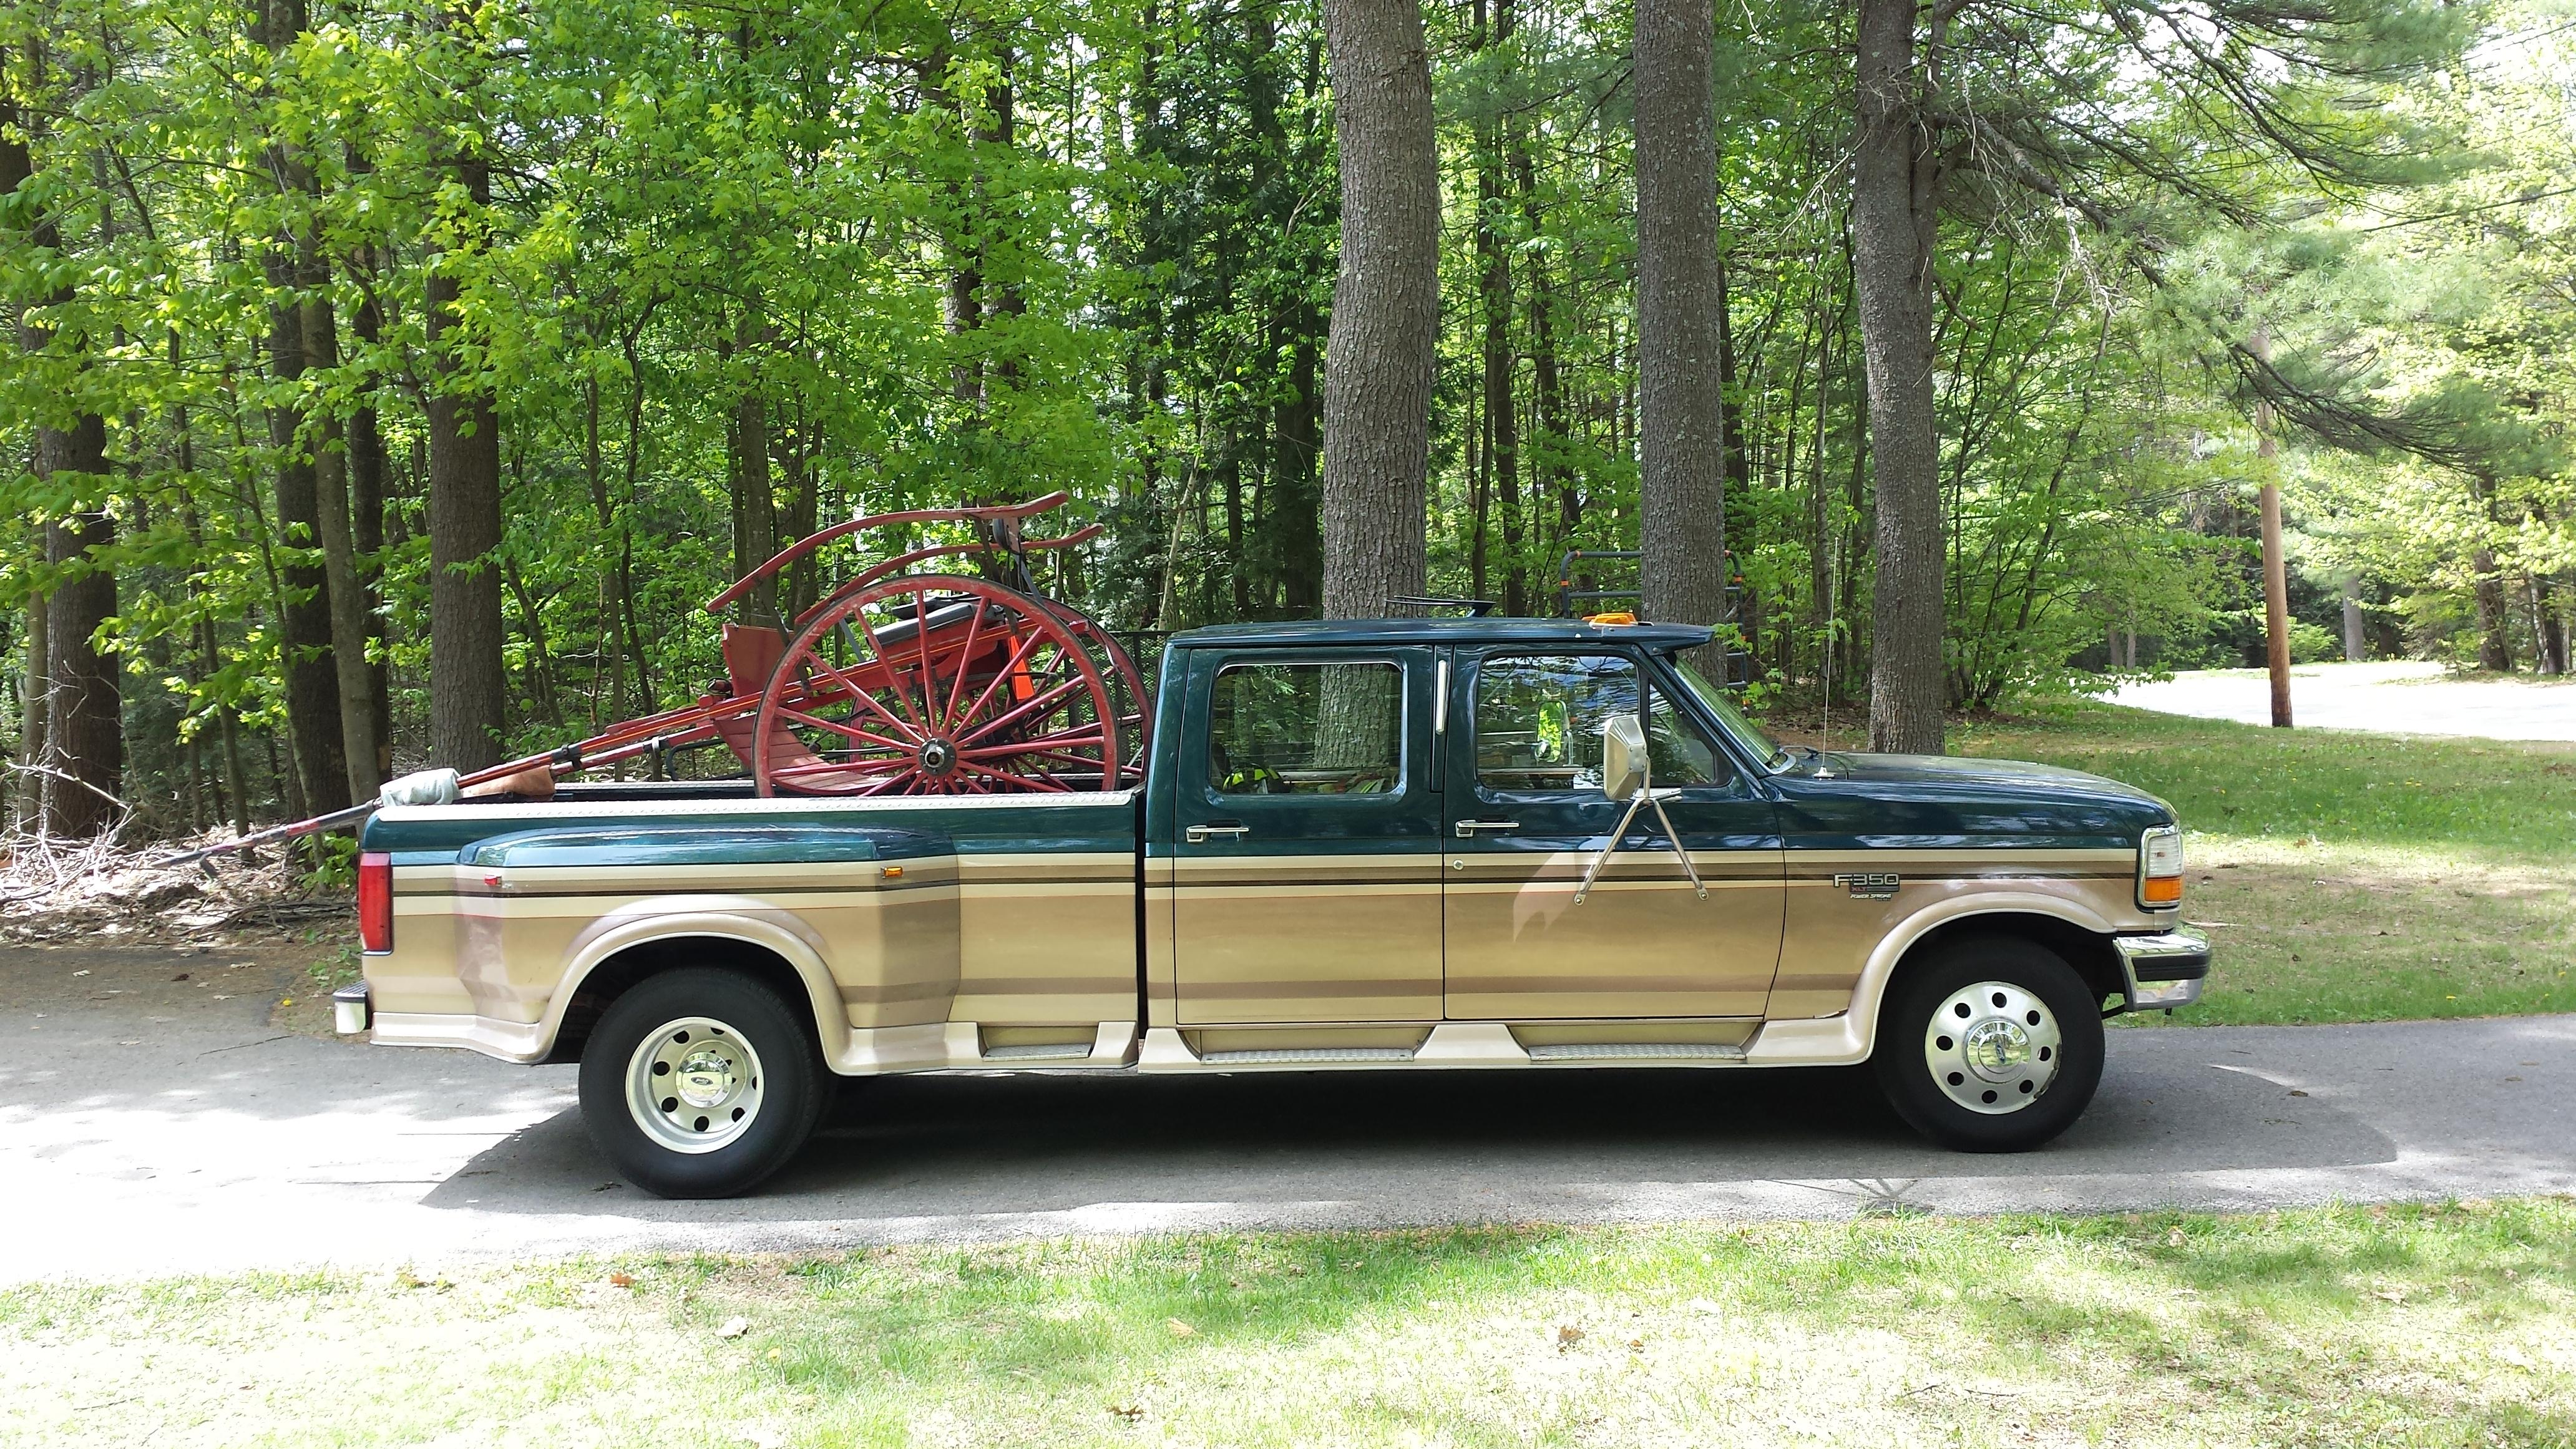 I have a 1995 Ford F350 Centurion that I am thinking about selling. 